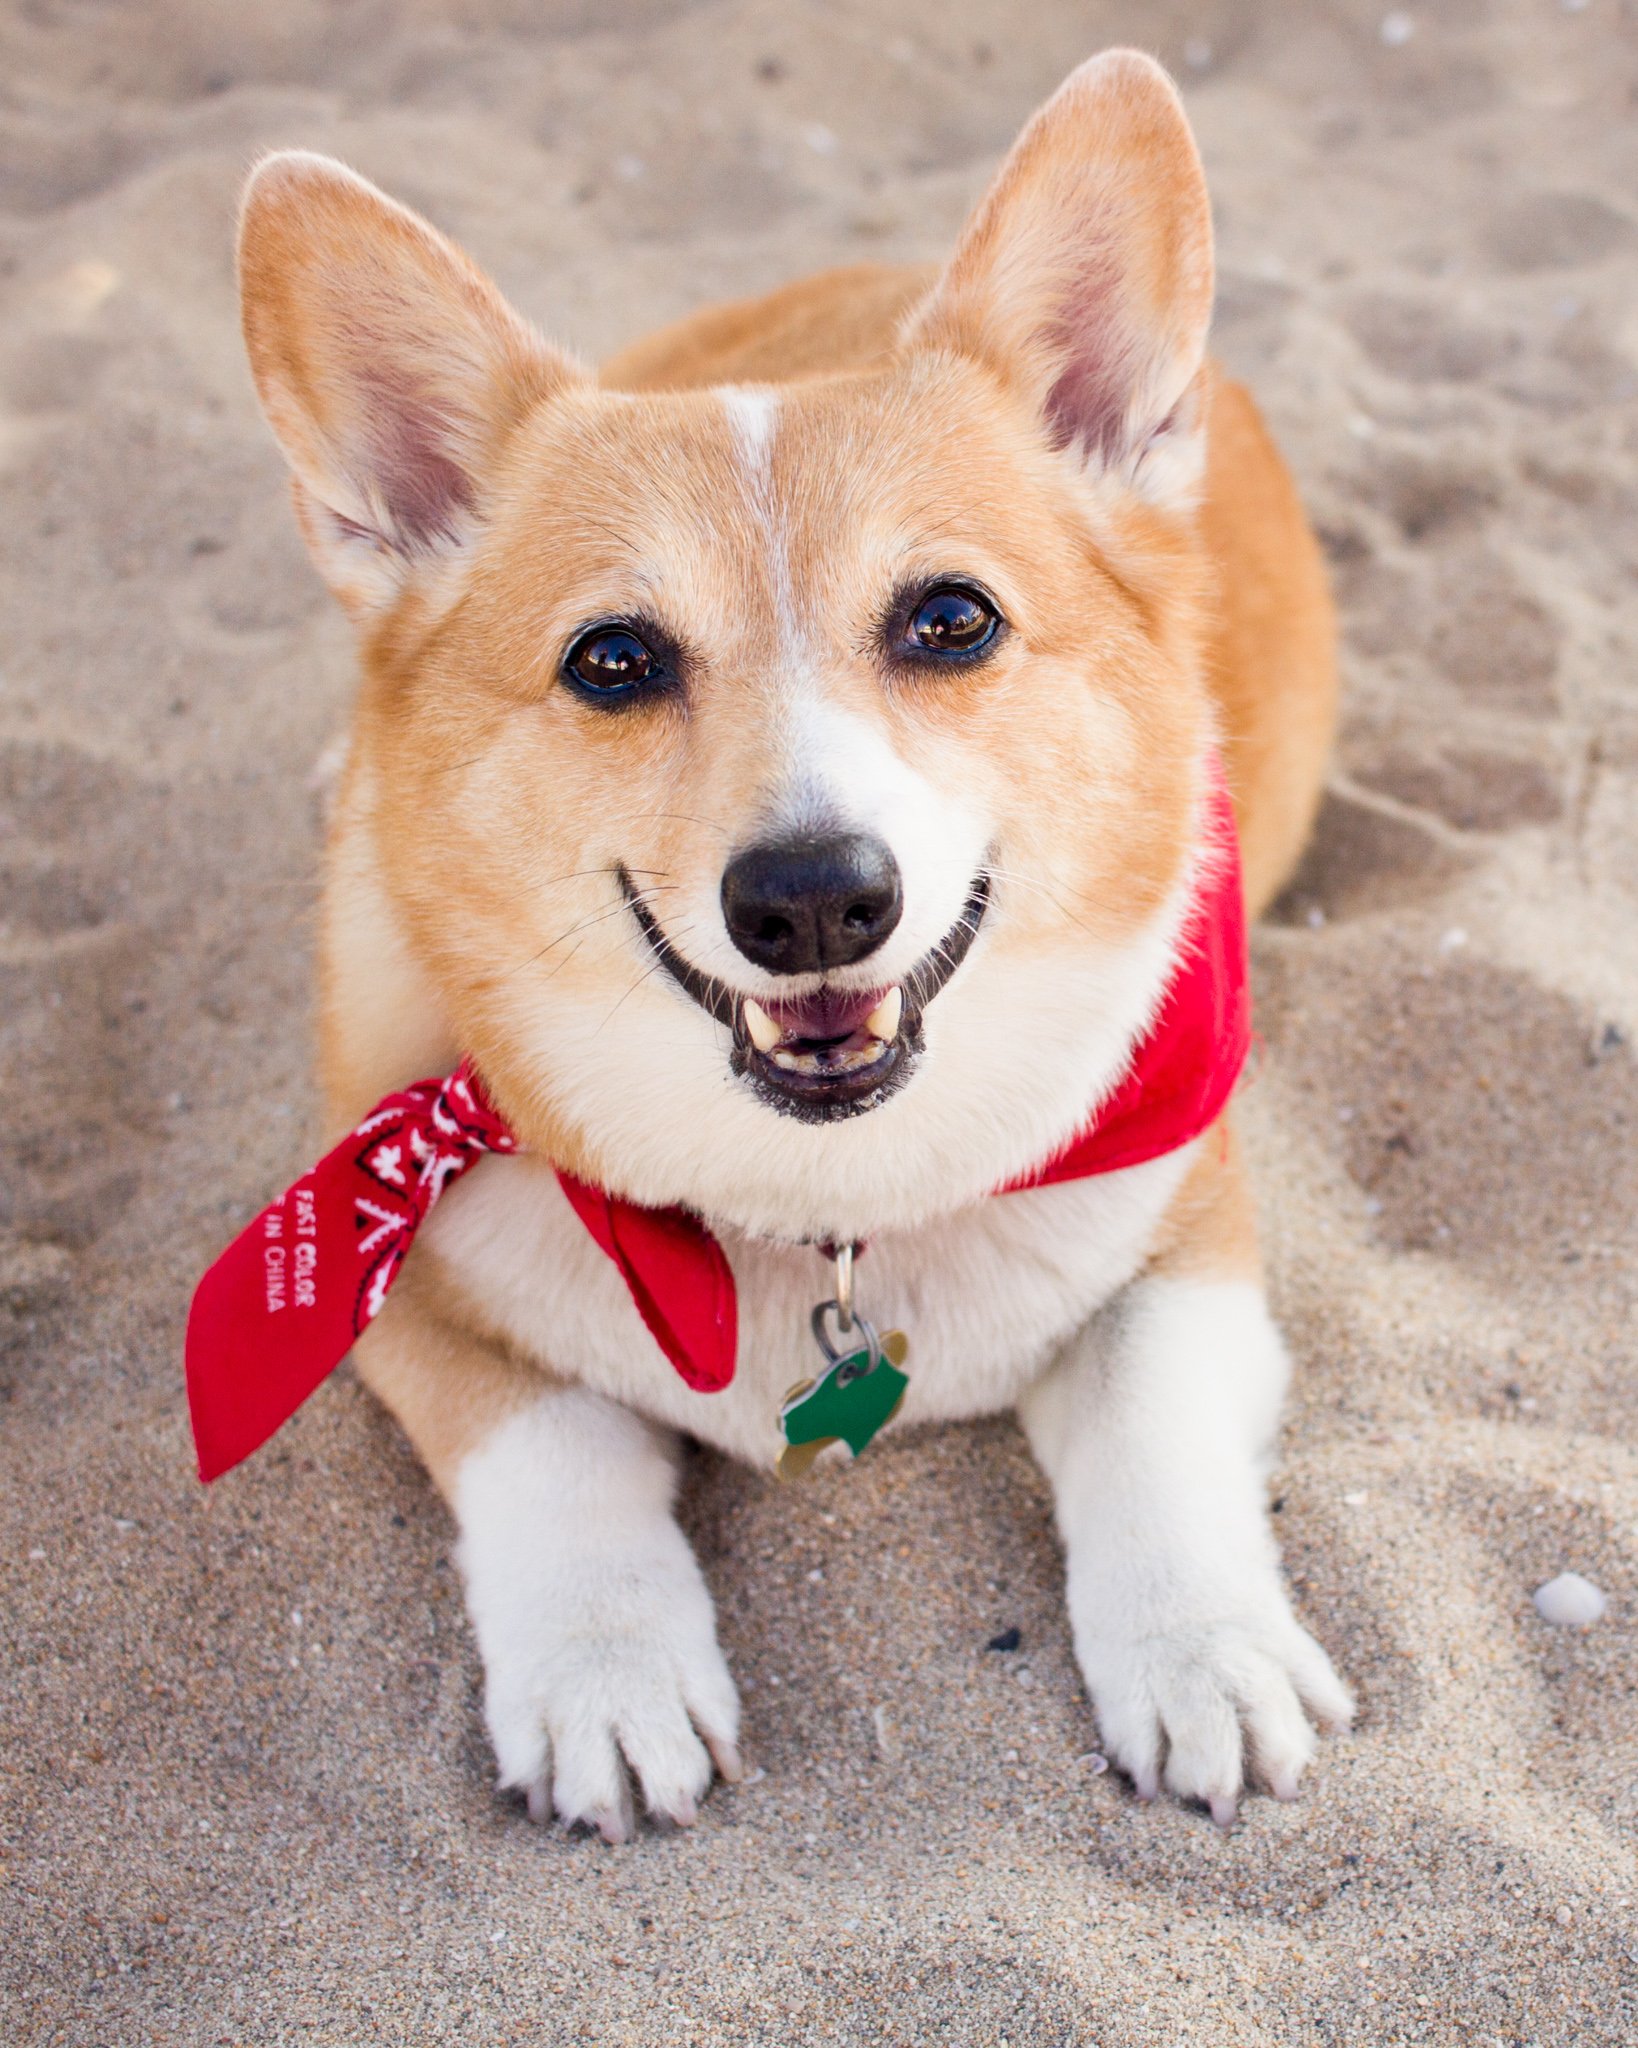 Orange County Pet and Dog Photography - by Steamer Lee - Corgi Beach Day - Southern Caliornia  69.jpg